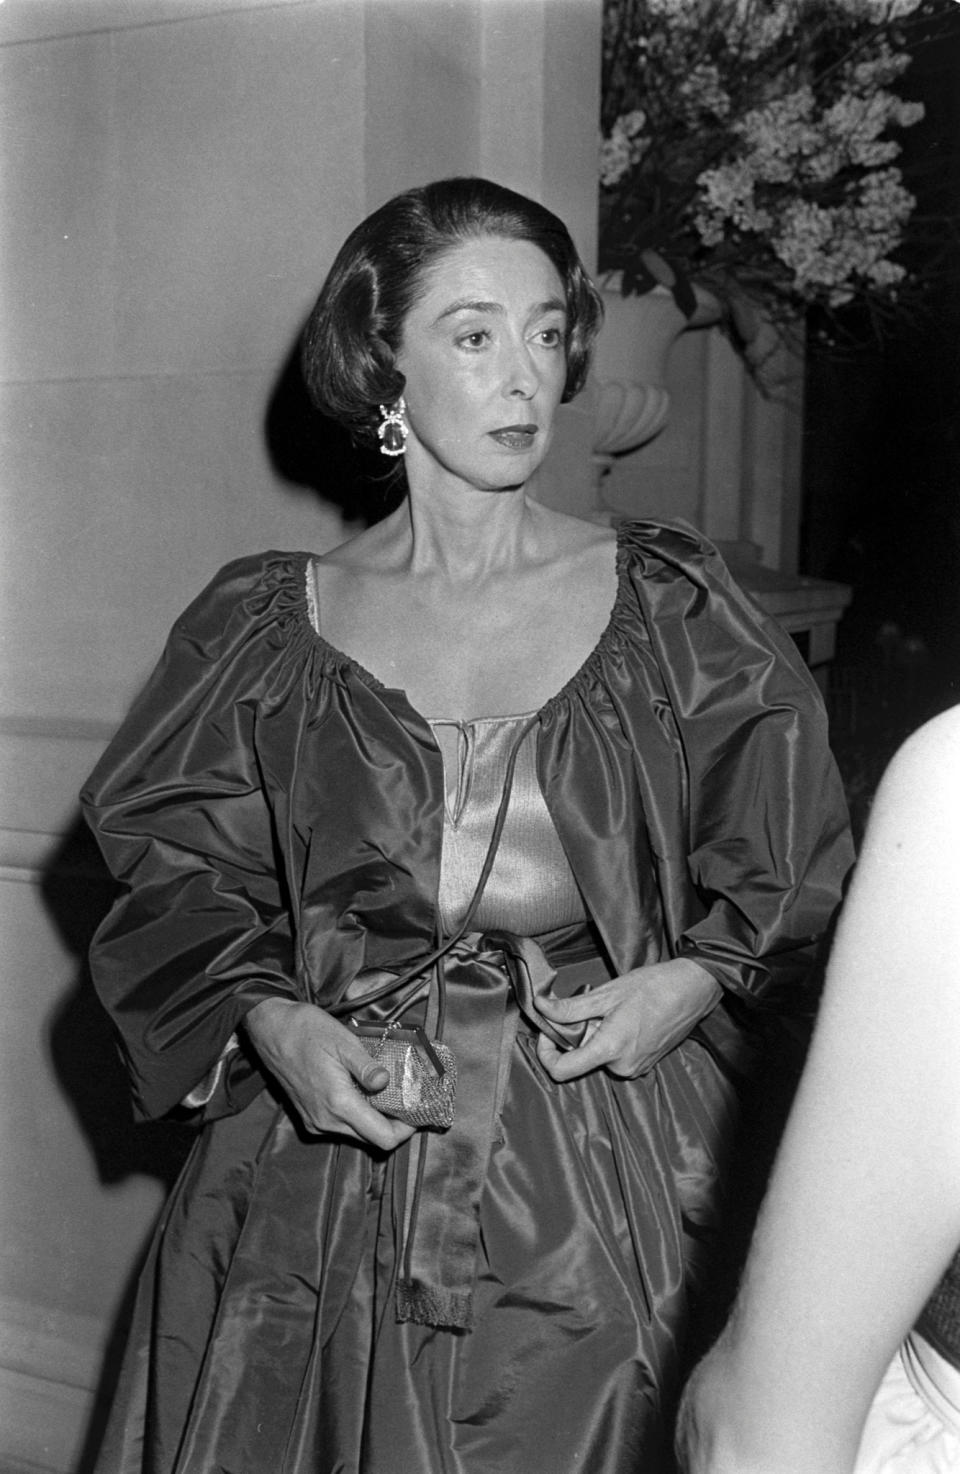 Mica Ertegun attends a party at the Metropolitan Museum of Art in New York City, celebrating the museum's exhibit "Glory of Russian Costume," on December 6, 1976.